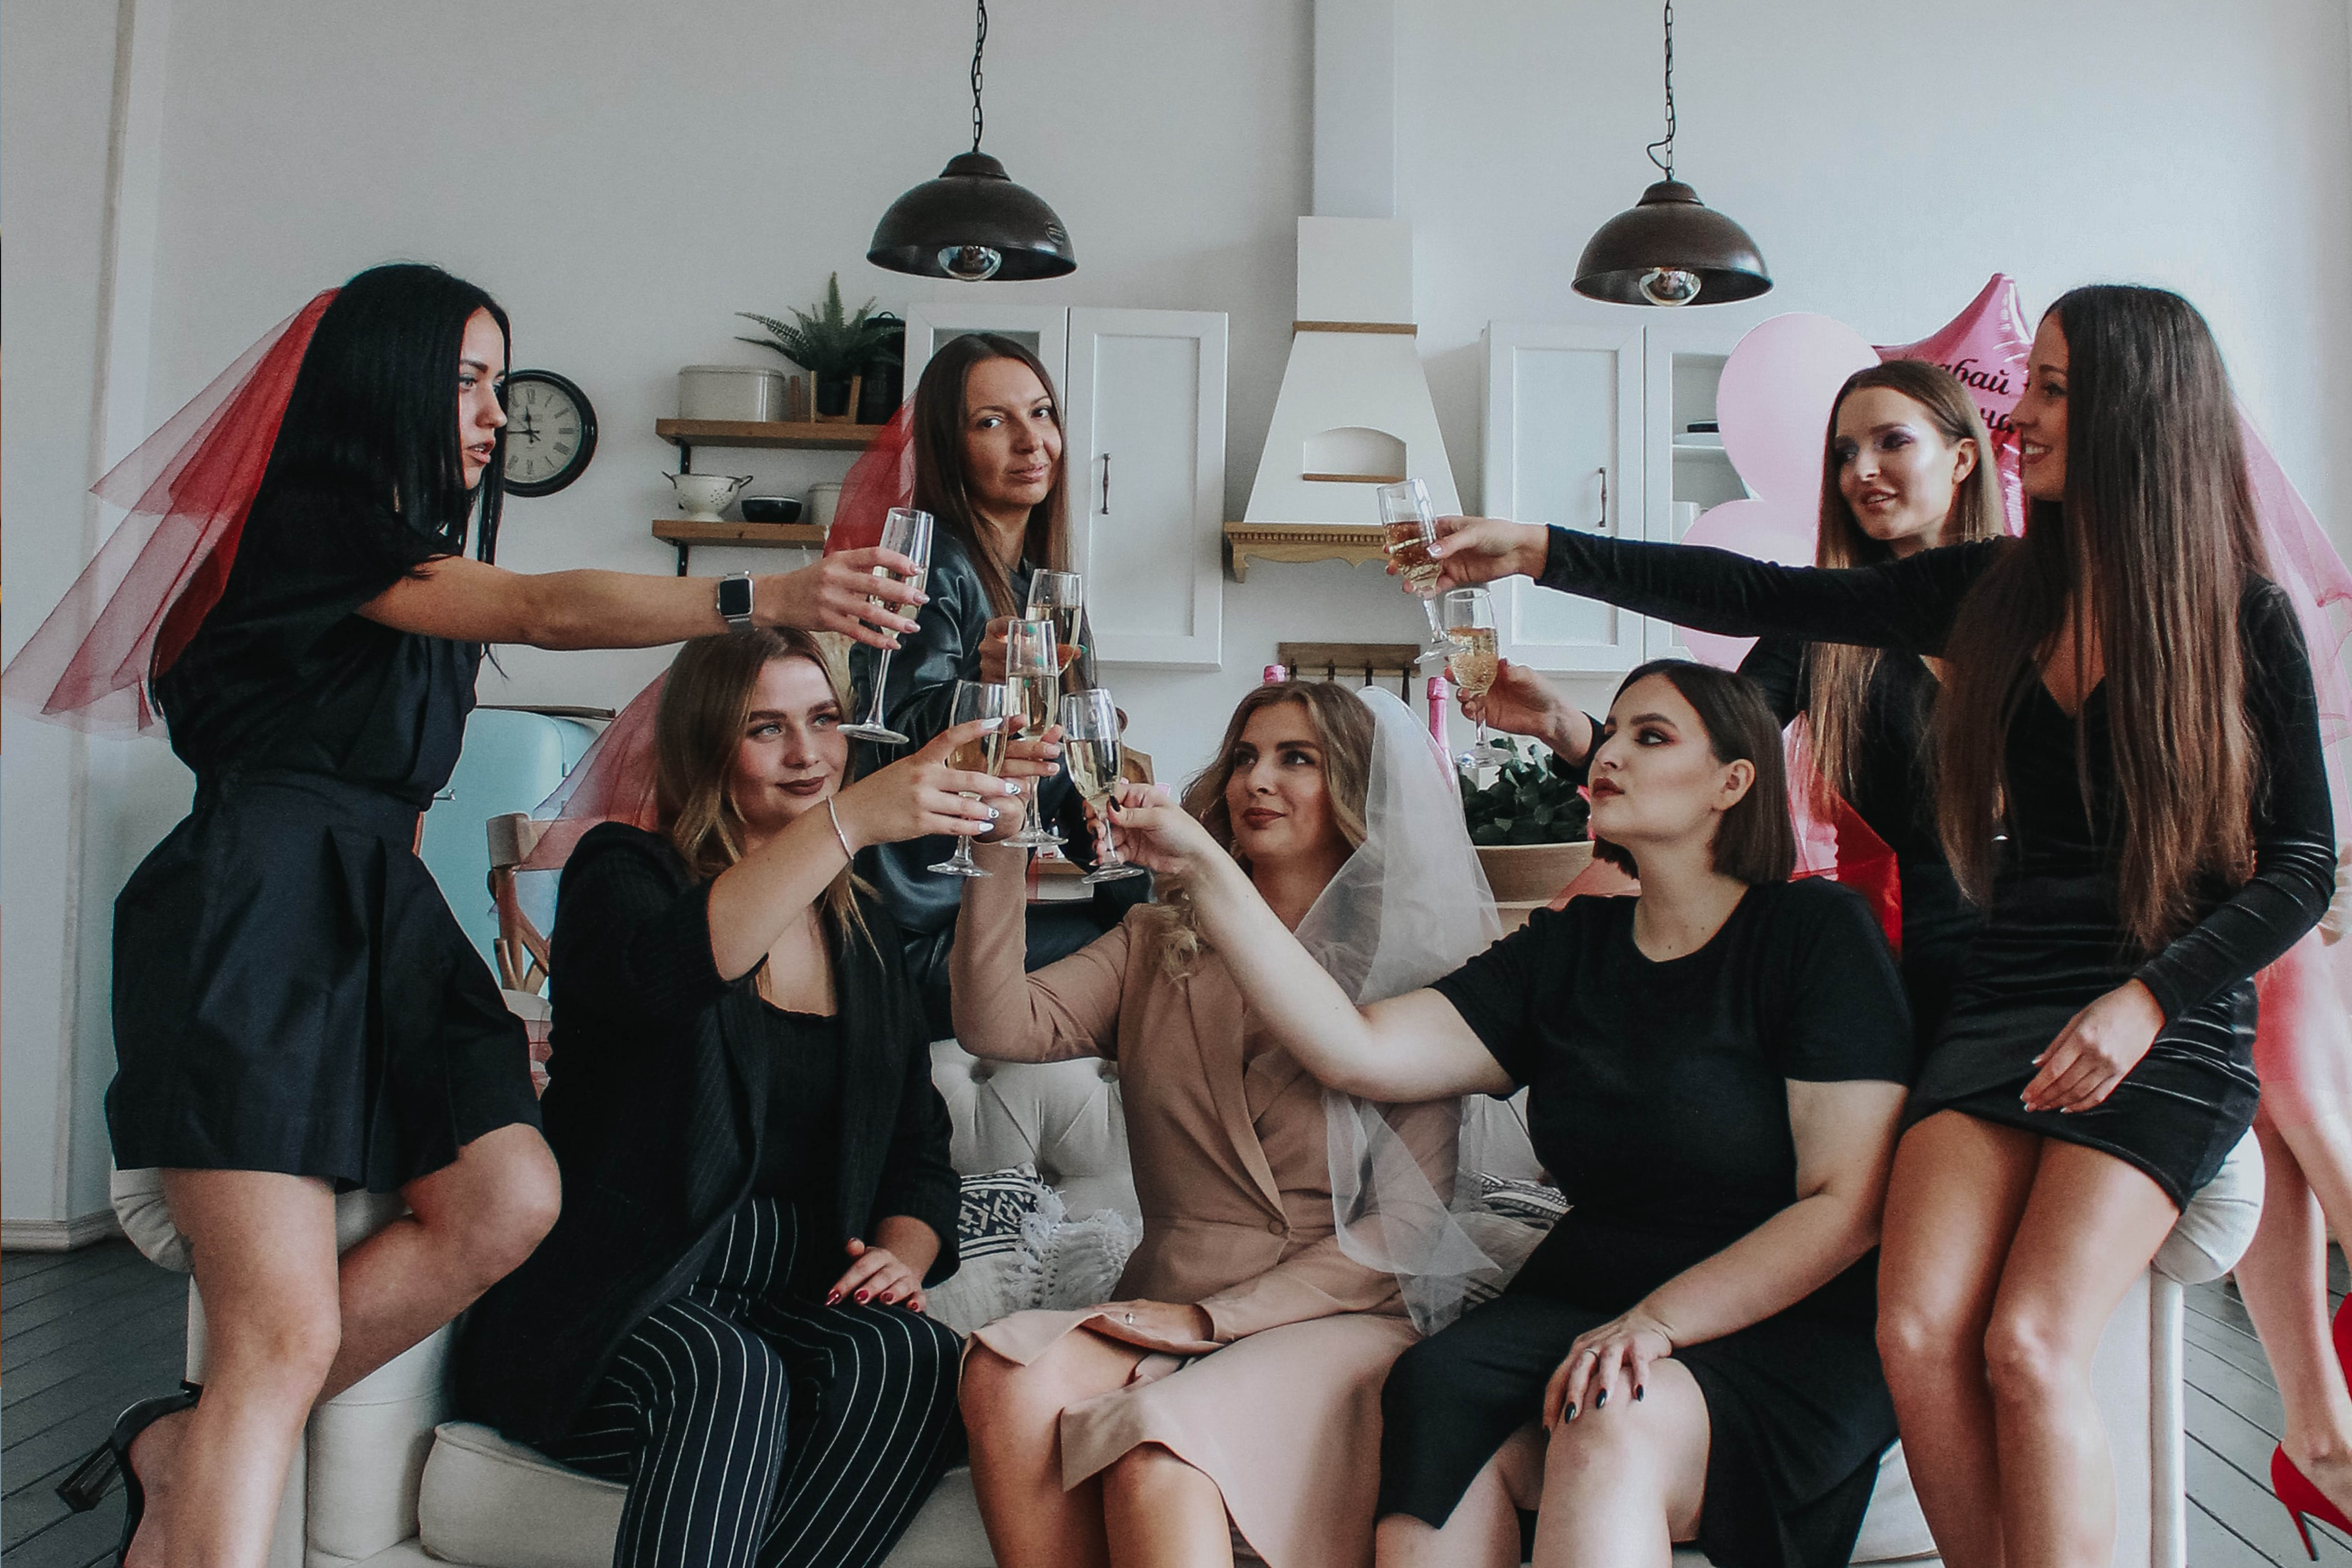 A group of friends at a bachelorette party